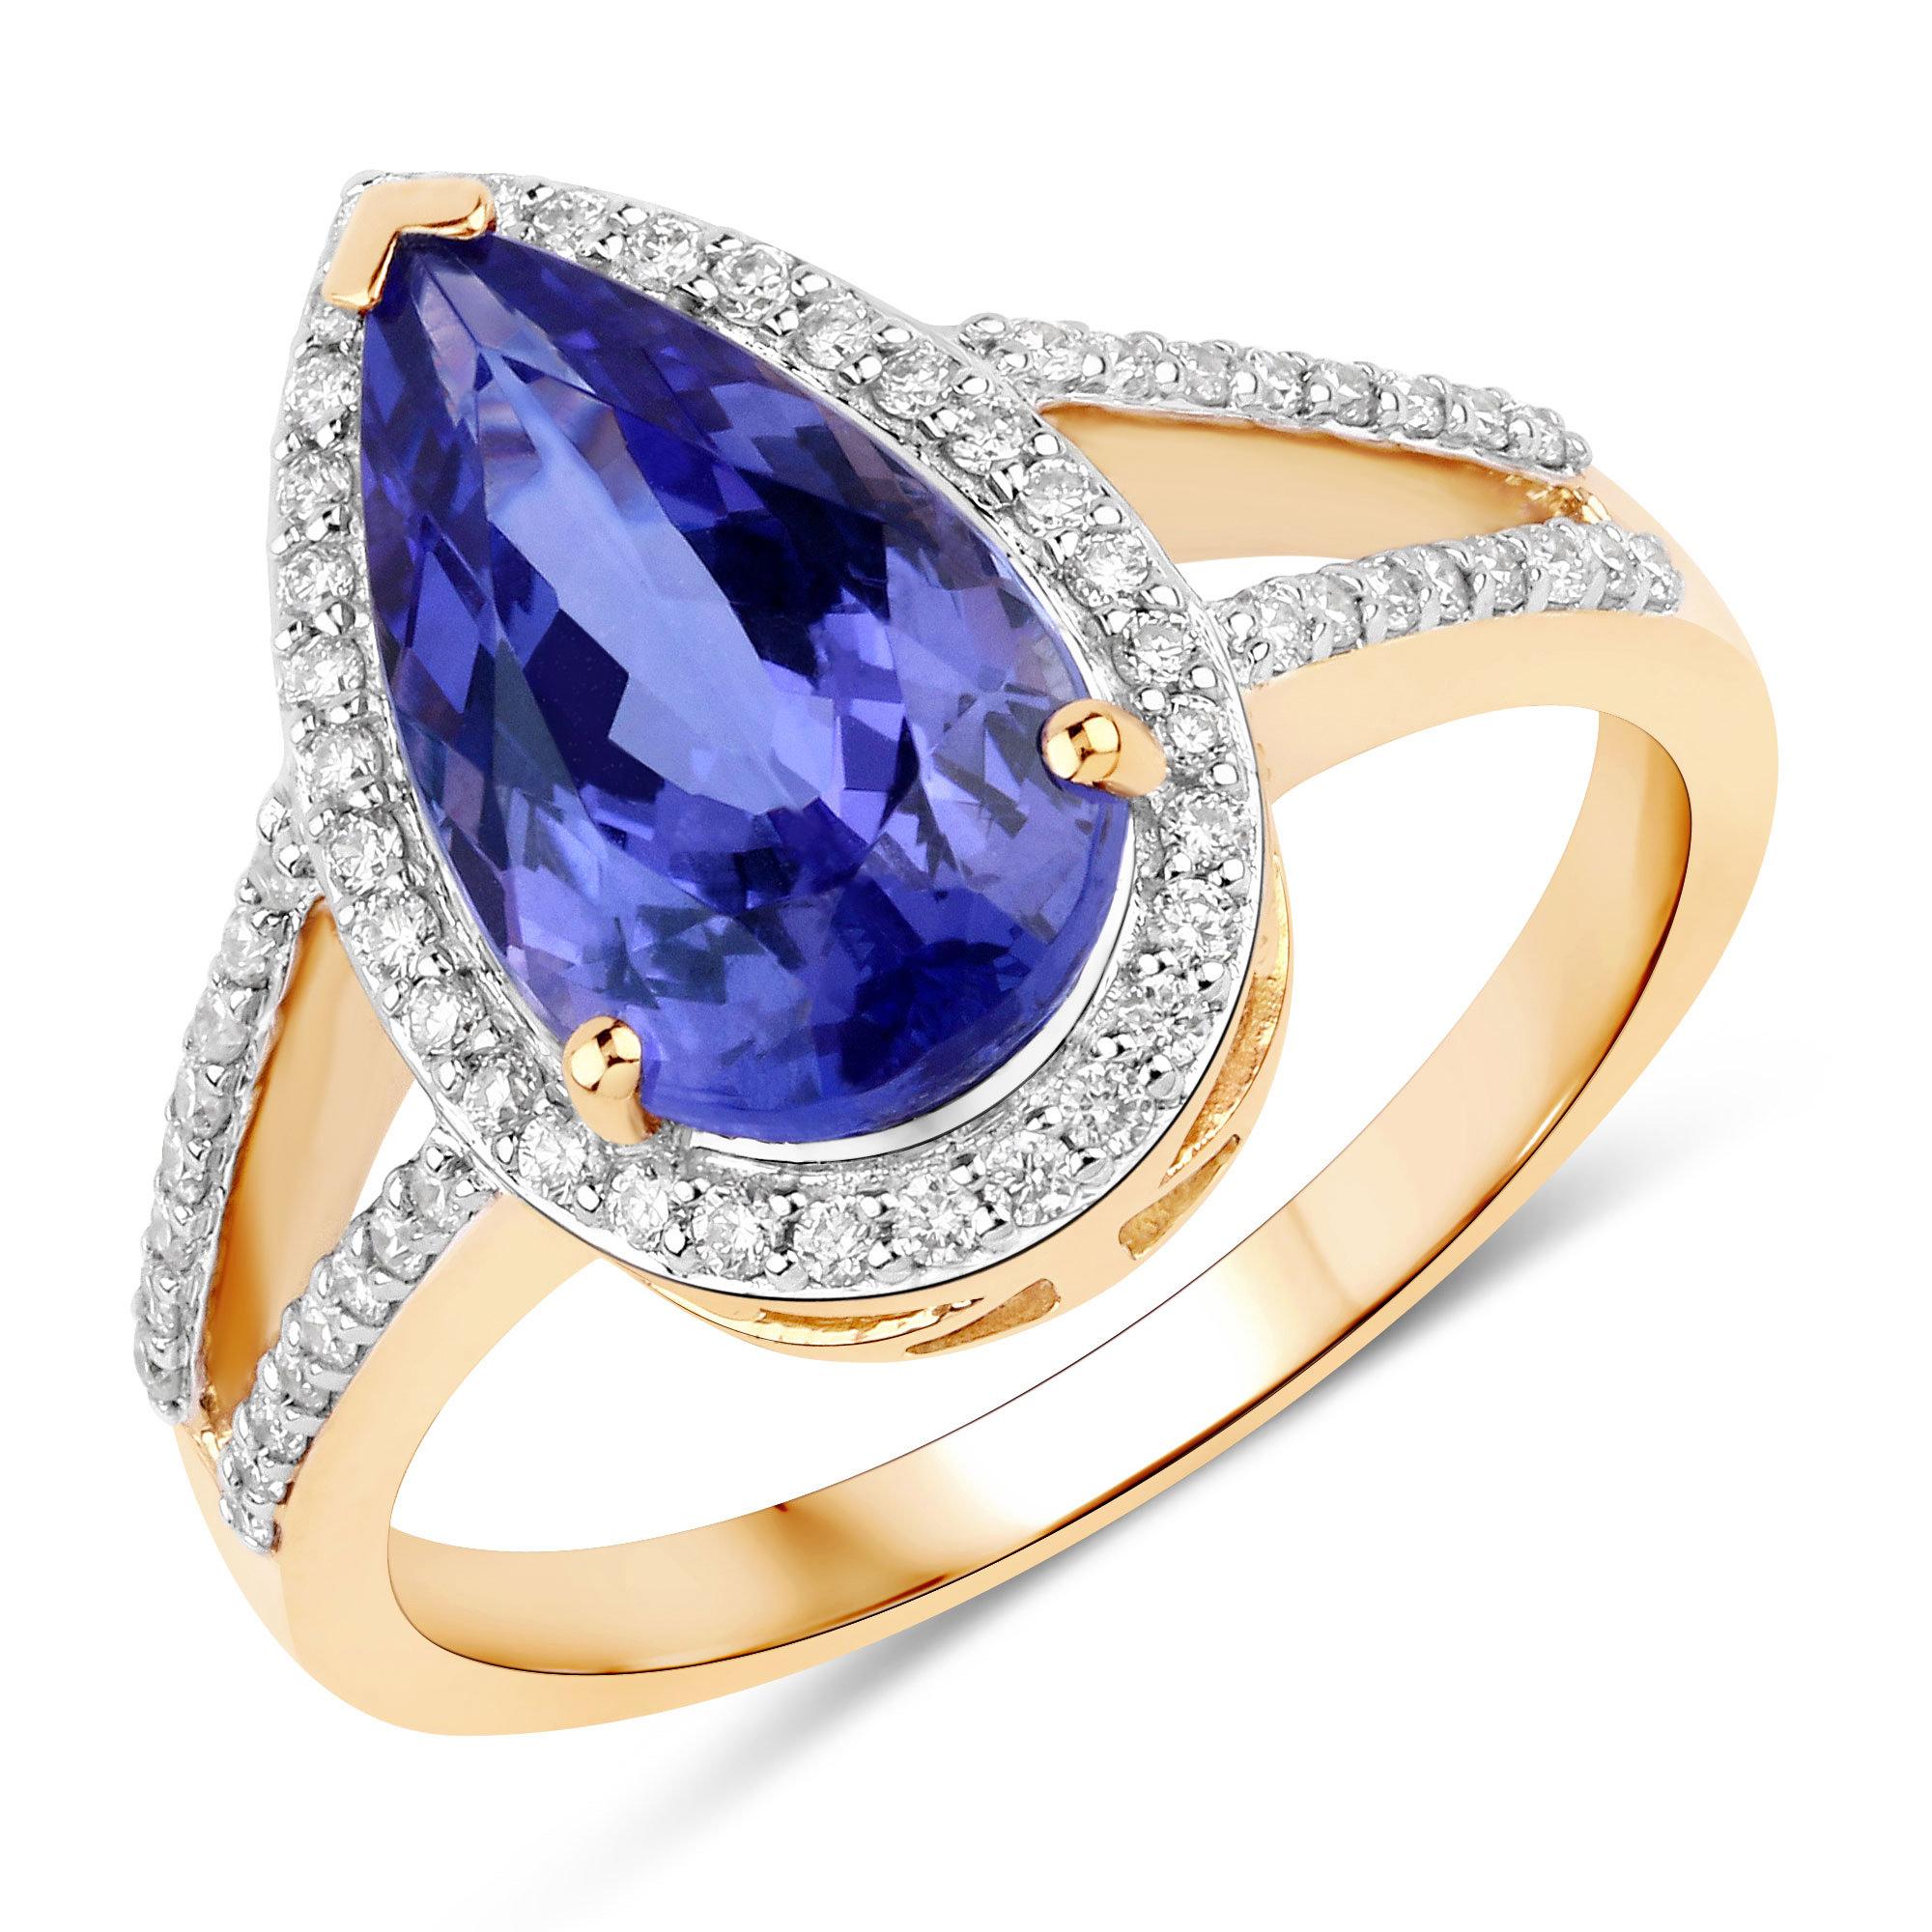 It comes with the appraisal by GIA GG/AJP
All Gemstones are Natural 
Pear Cut Tanzanite = 3.16 Carat
64 Round Diamonds = 0.29 Carats
Metal: 14K Yellow Gold
Ring Size: 7* US
*It can be resized complimentary